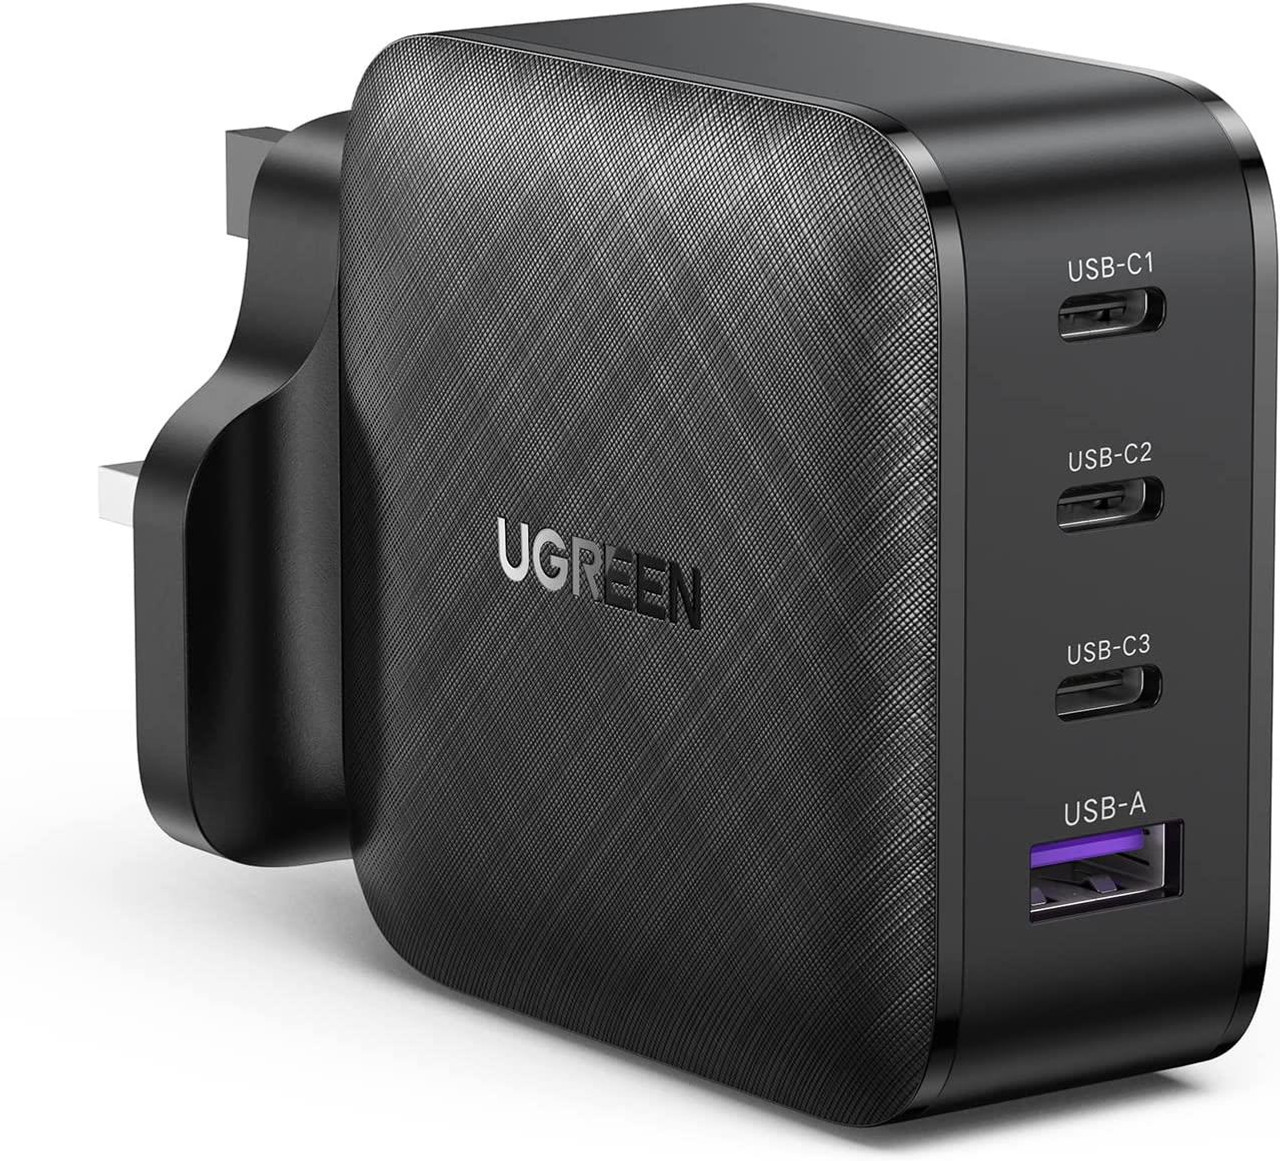 UGREEN 65W USB C Charger, Nexode 3 Port Travel Charger GaN Fast  International Charger with US UK EU Plug, USB C Power Adapter for MacBook  Pro/Air